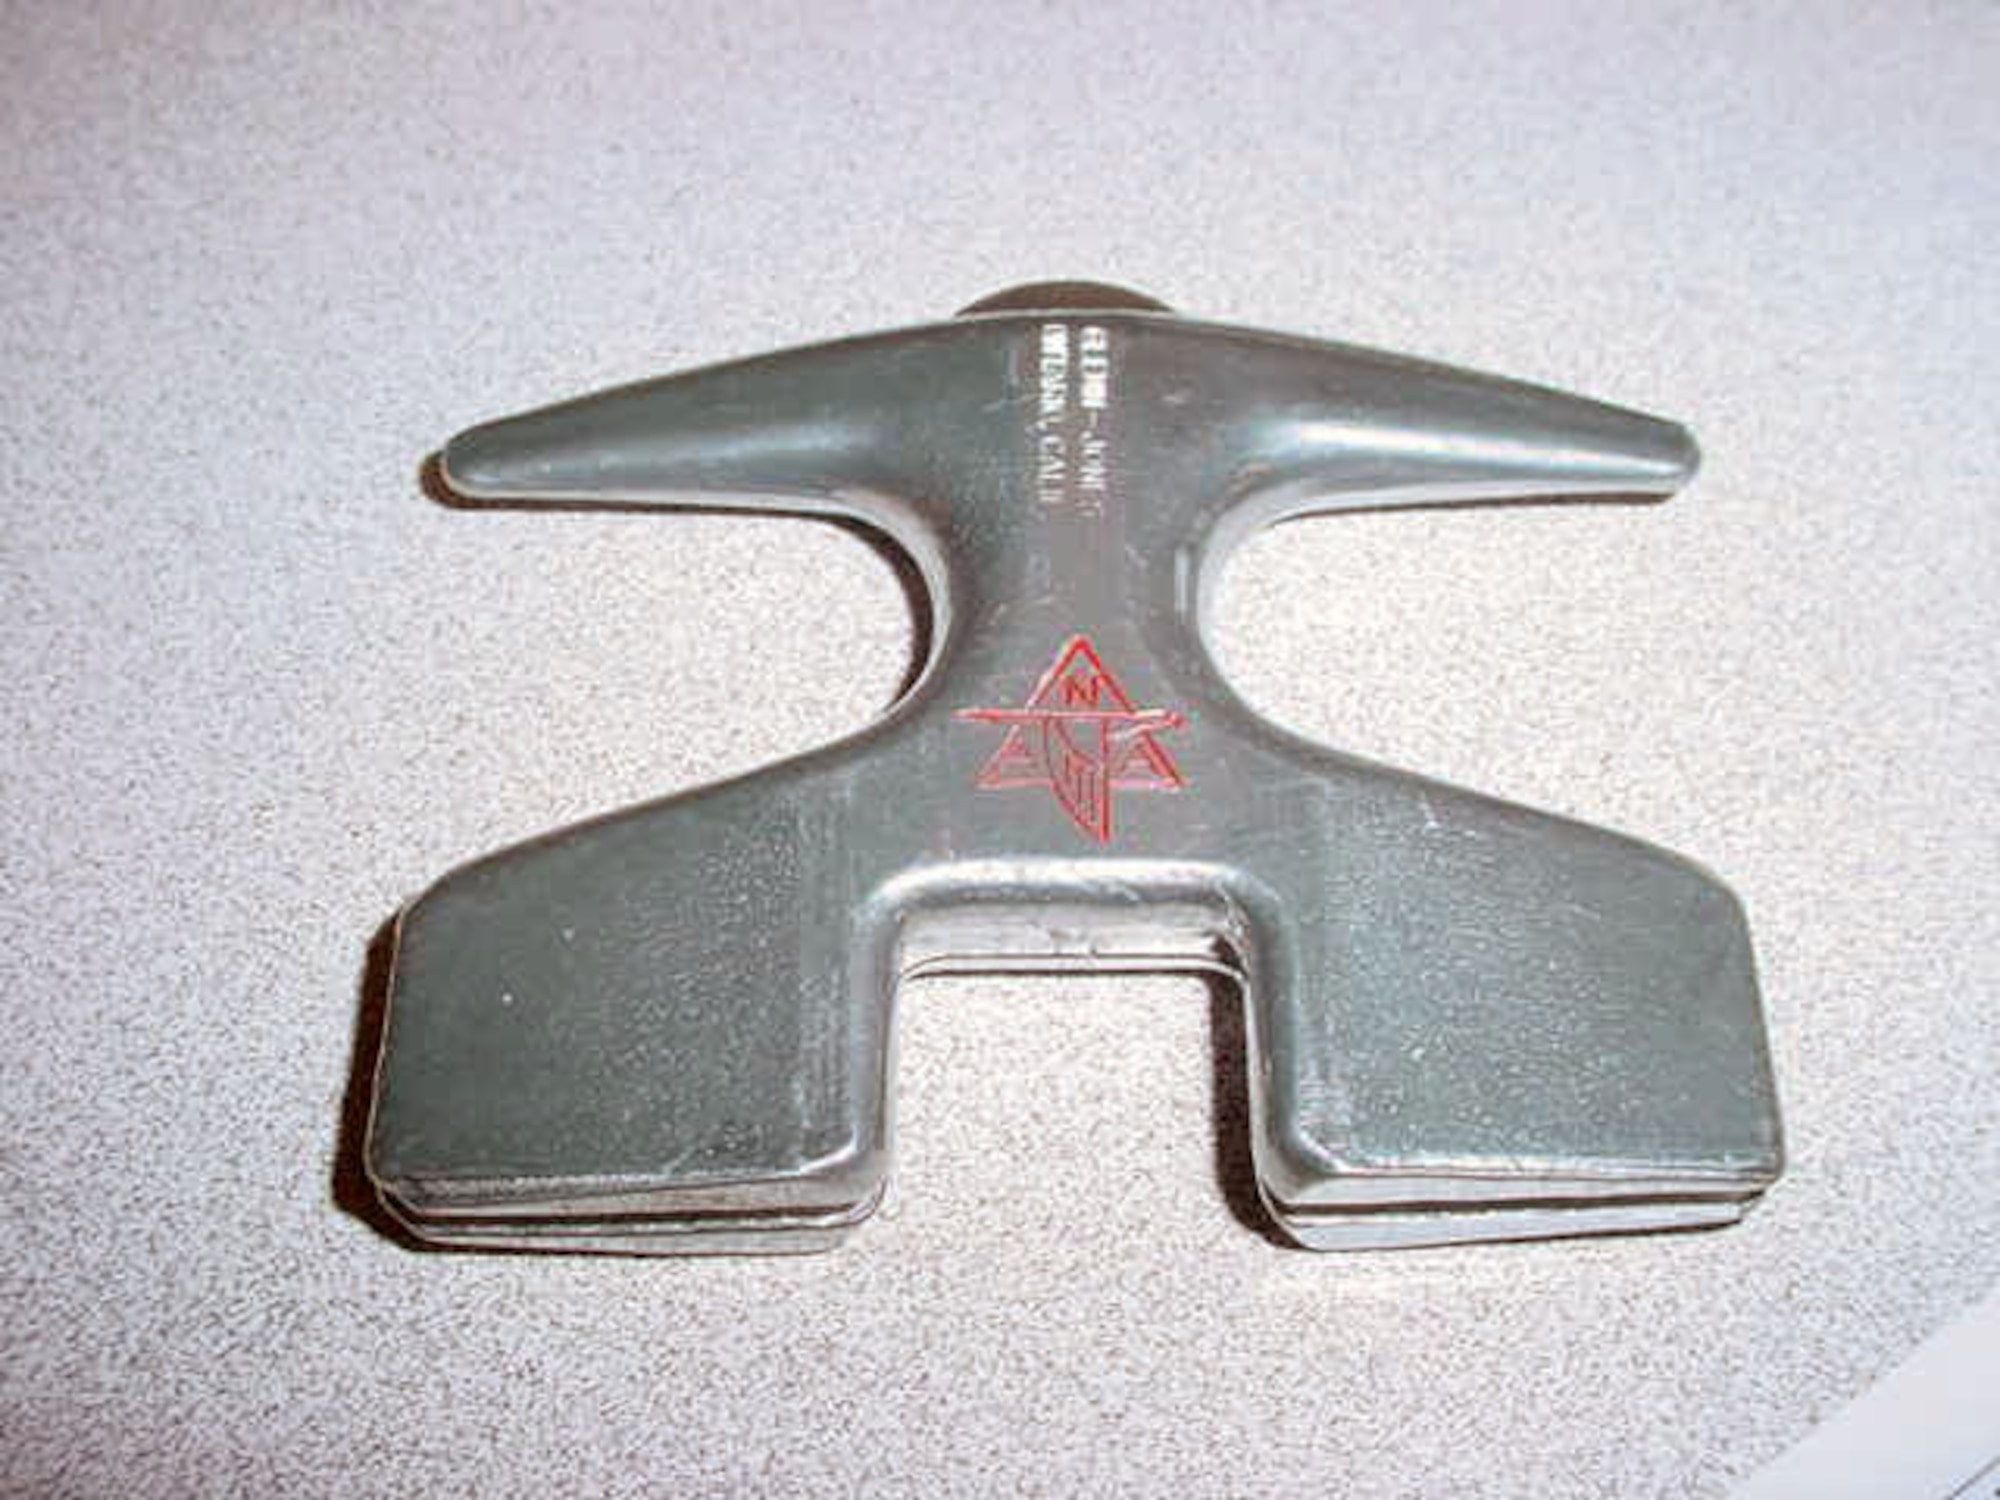 This flight wrench belonged to the donor's husband, Van. E. Chandler, who joined the Army Air Forces in February 1943 and served more than 20 years before retiring as a colonel. He is credited as being the youngest World War II ace at the age of 19. He also had three MiG kills in Korea and flew F-100s in Vietnam. (U.S. Air Force photo)